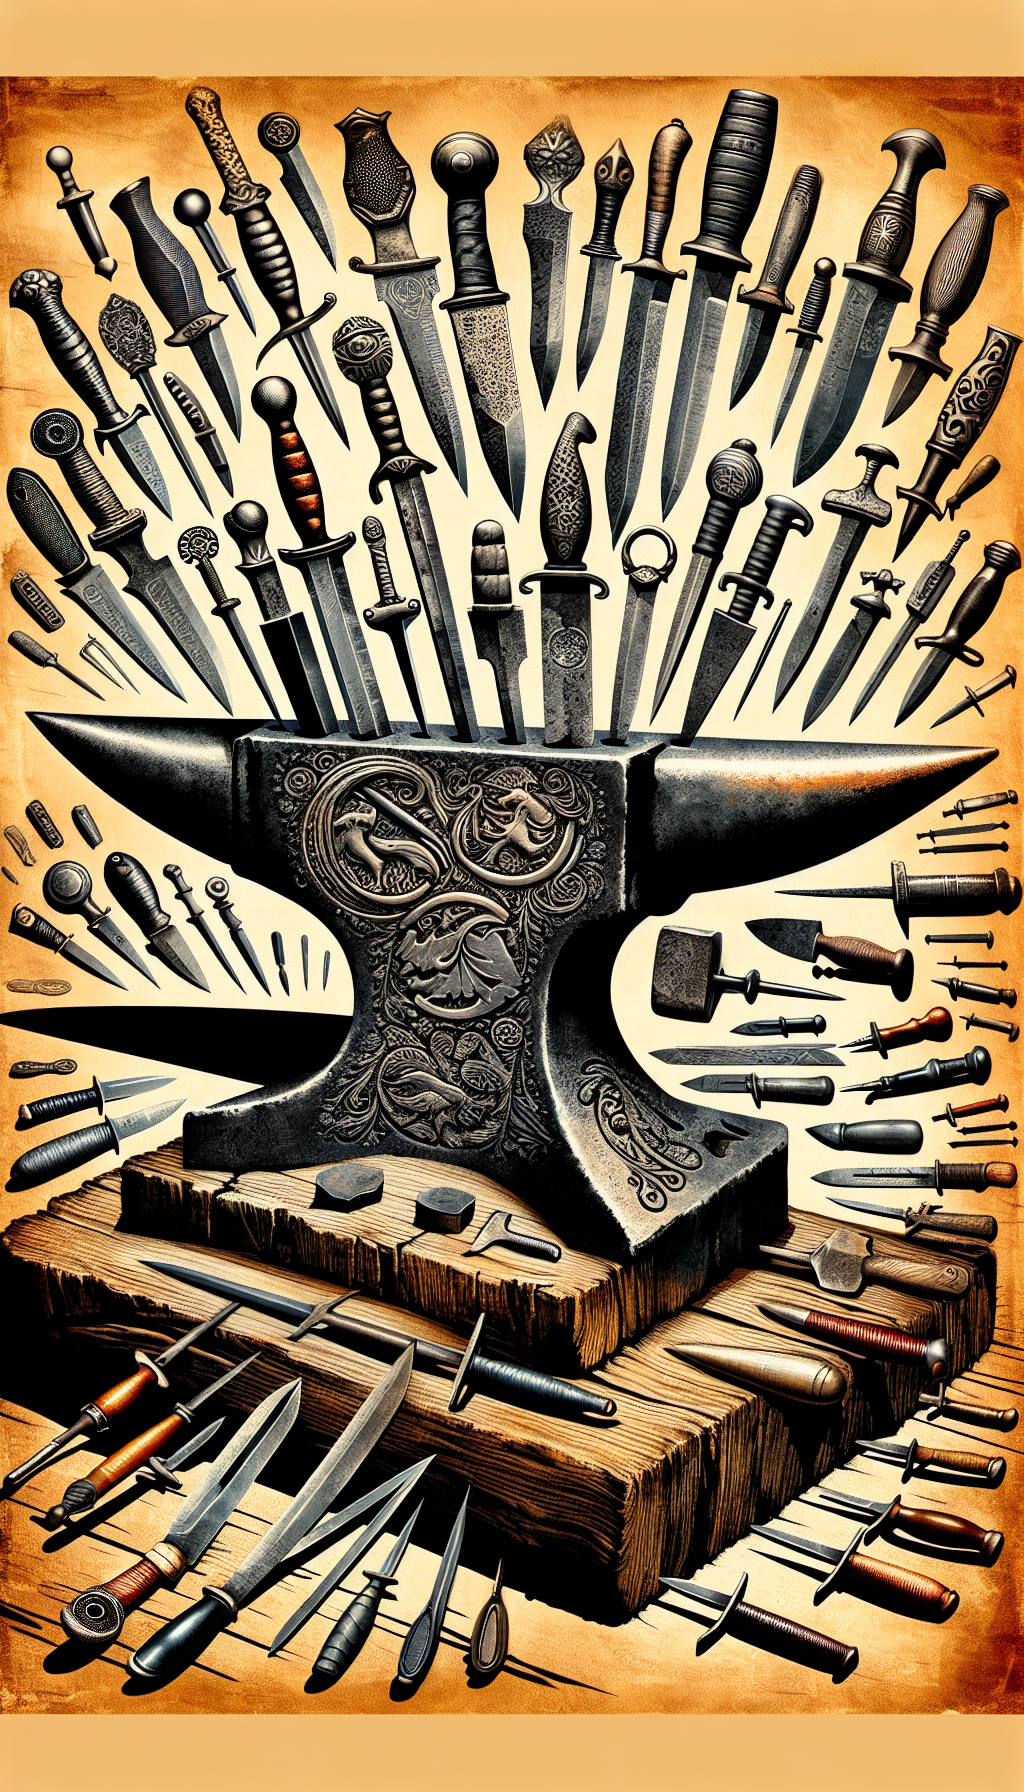 A vivid tableau depicts an anvil bearing the marks of legendary knife makers, with their iconic blades embedded into the metal as if a timeline of craftsmanship. Each blade features a magnified insignia, illustrating the unique stamp used for identification. Their shadows cast a mosaic of antique marks onto a historical backdrop, blending styles from intricate etchings to bold woodcut visuals.